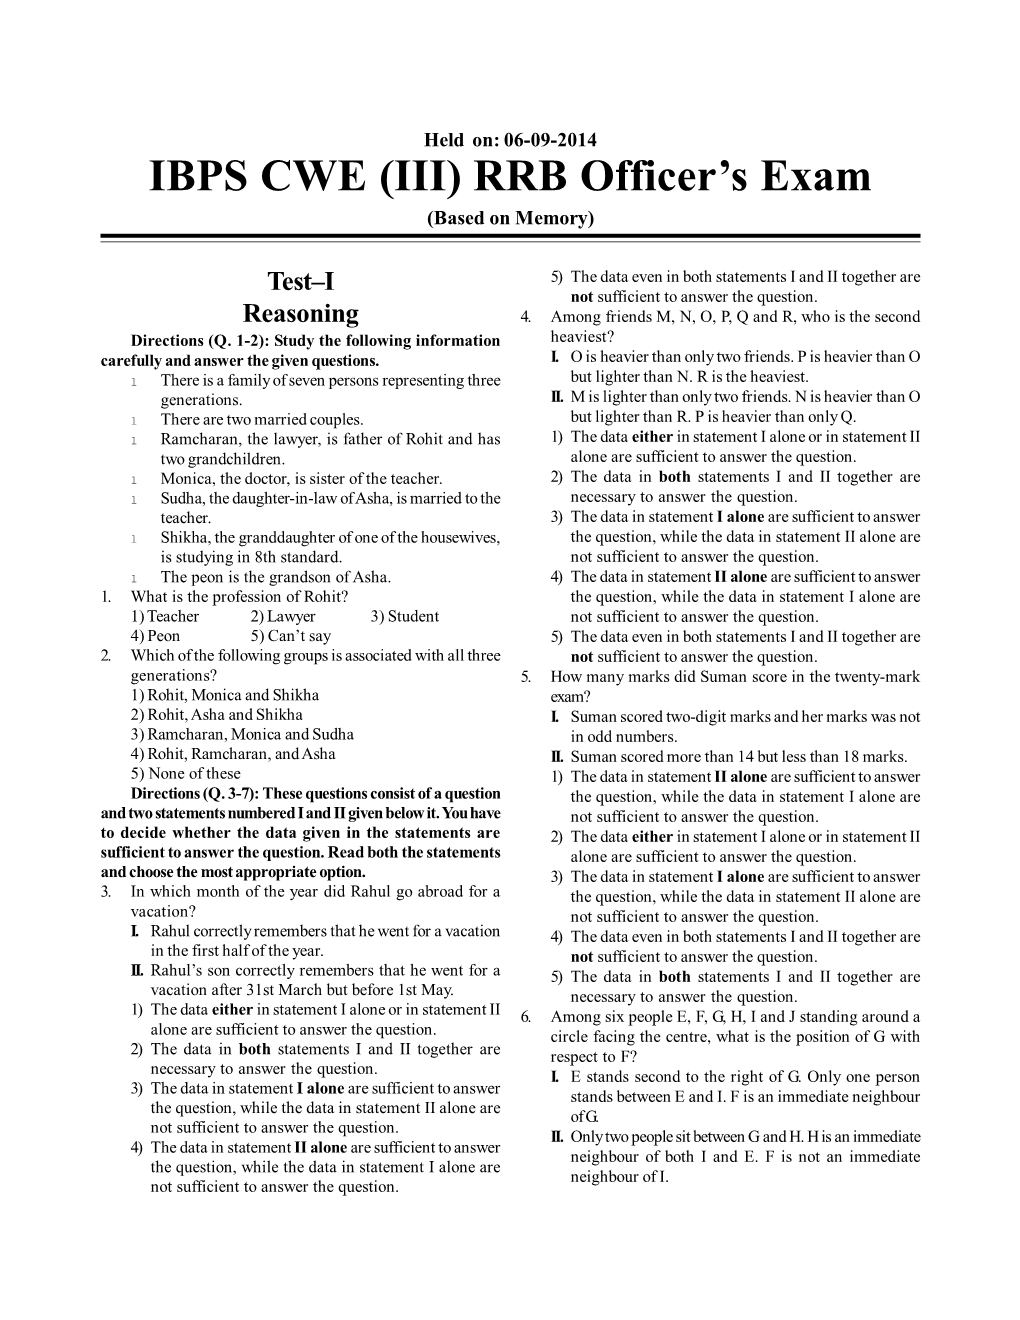 IBPS CWE (III) RRB Officer’S Exam (Based on Memory)